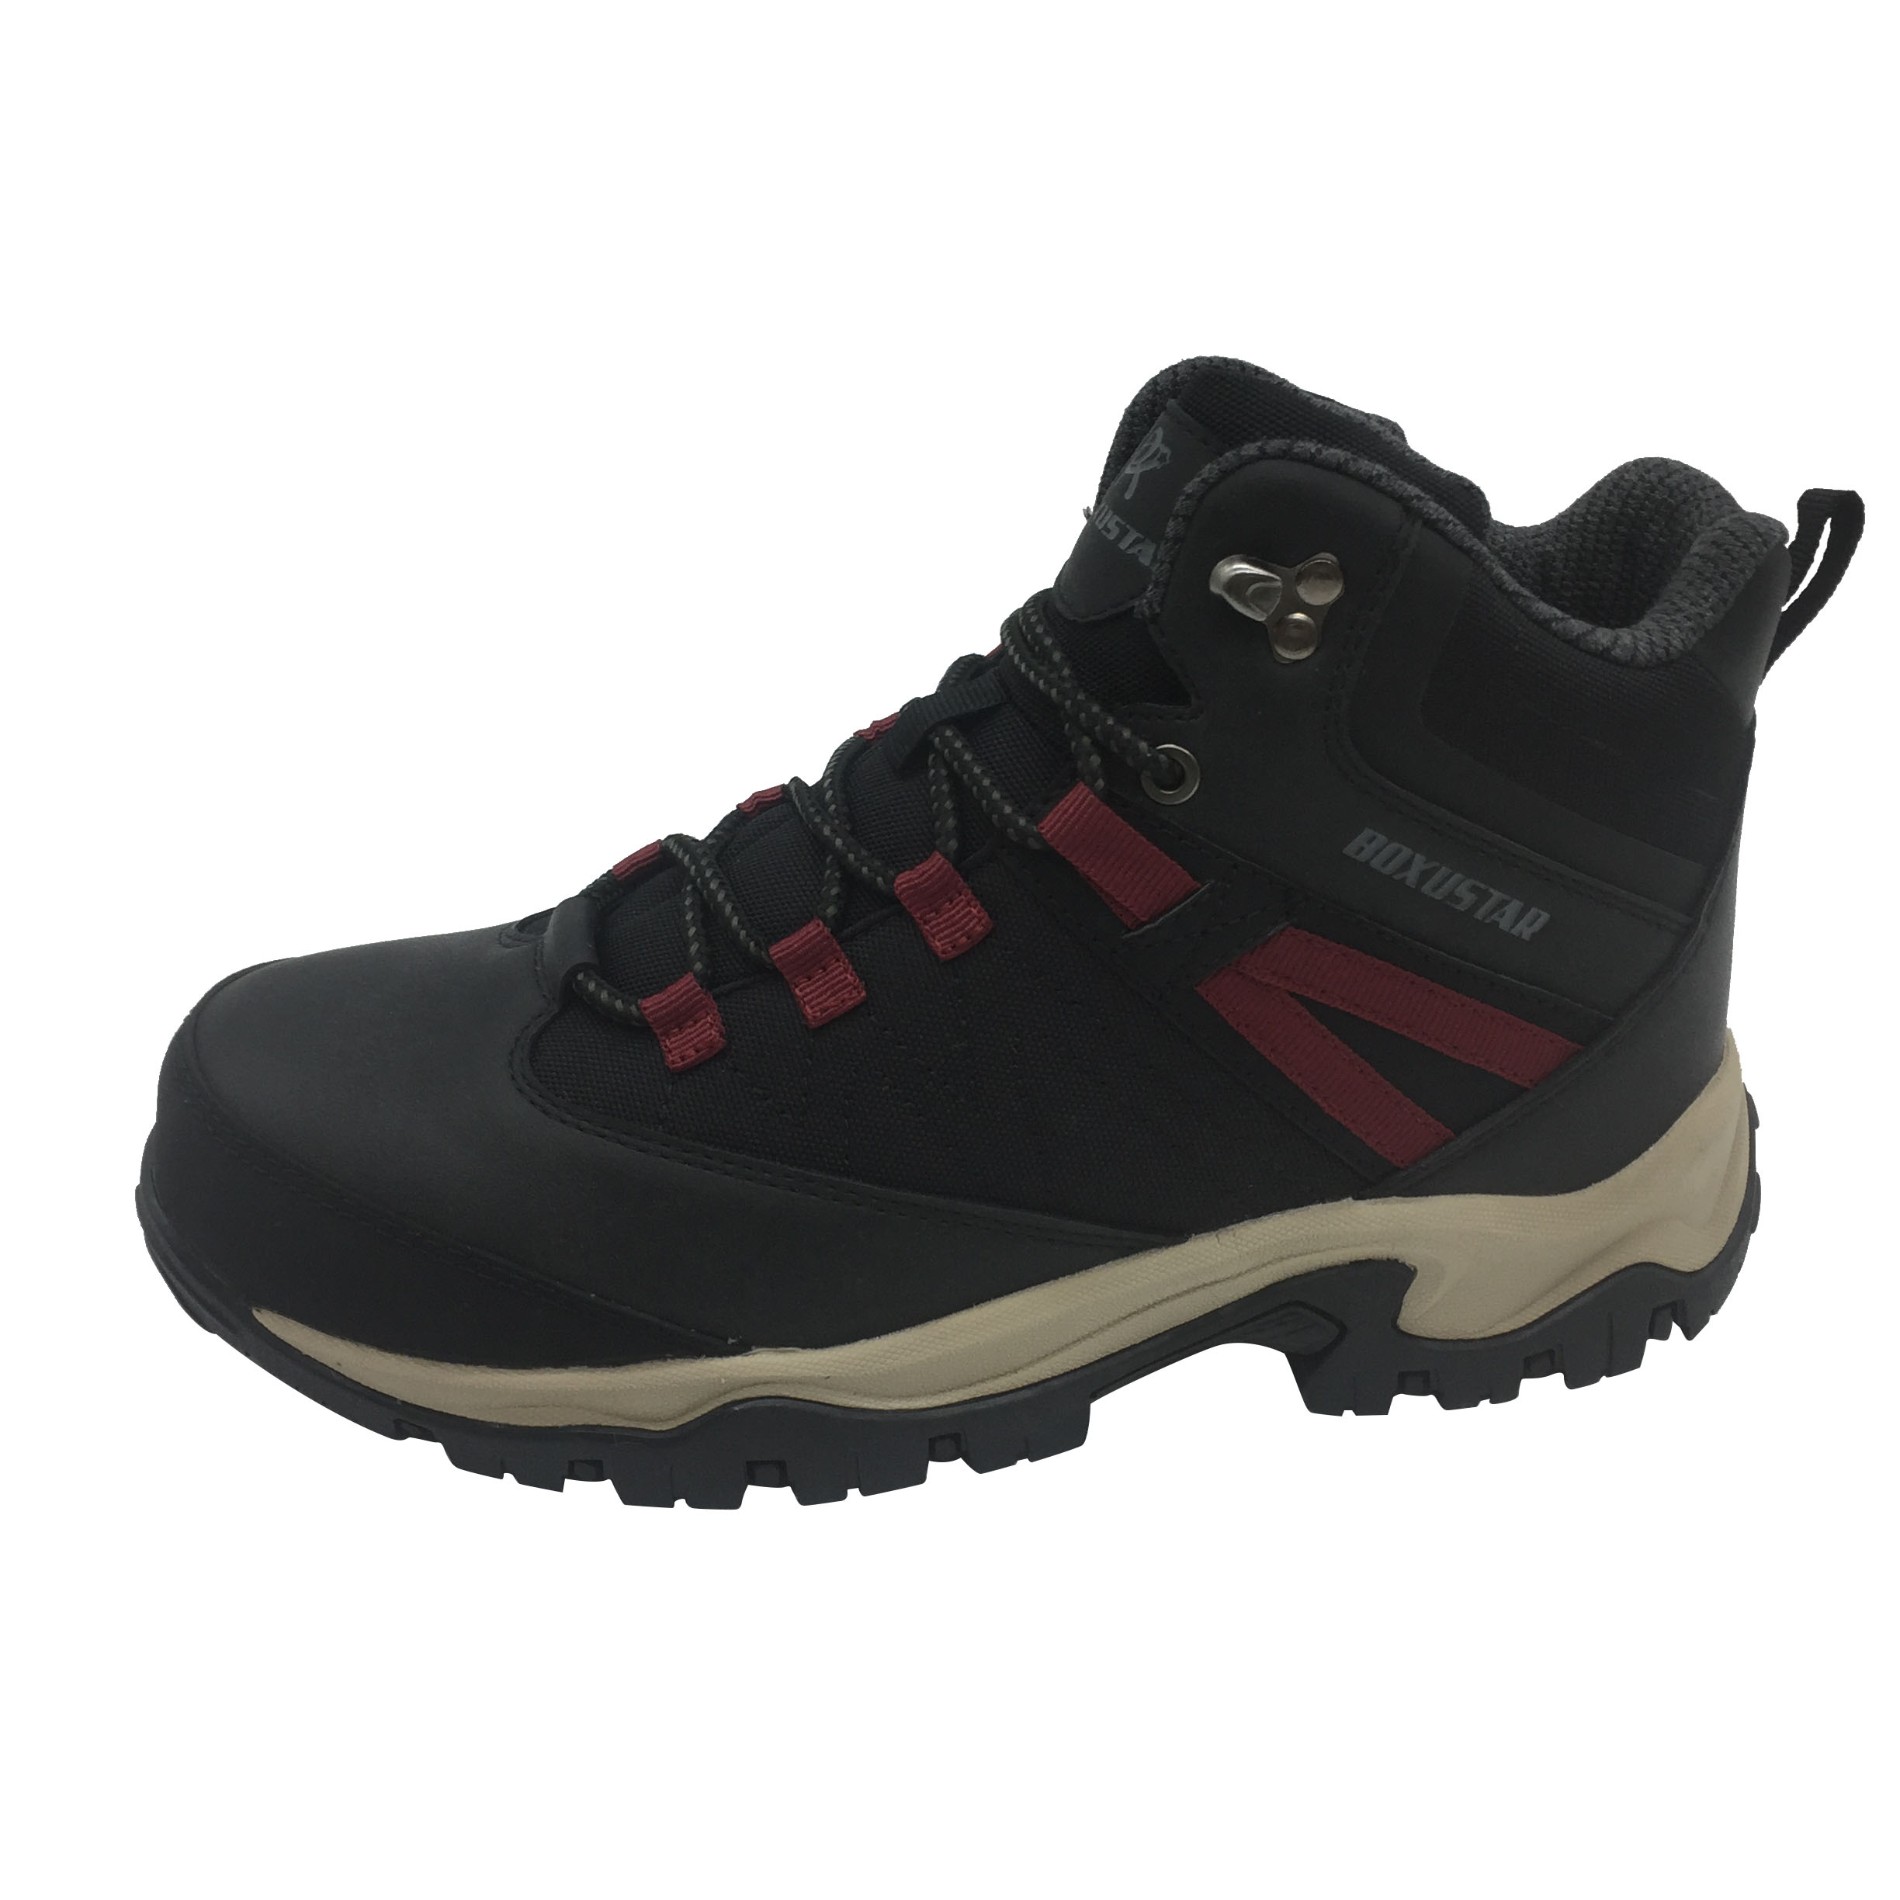 New collection Anti - smashing anti - puncture wear - resistant safety shoes steel toe shoes Manufacturers, New collection Anti - smashing anti - puncture wear - resistant safety shoes steel toe shoes Factory, Supply New collection Anti - smashing anti - puncture wear - resistant safety shoes steel toe shoes